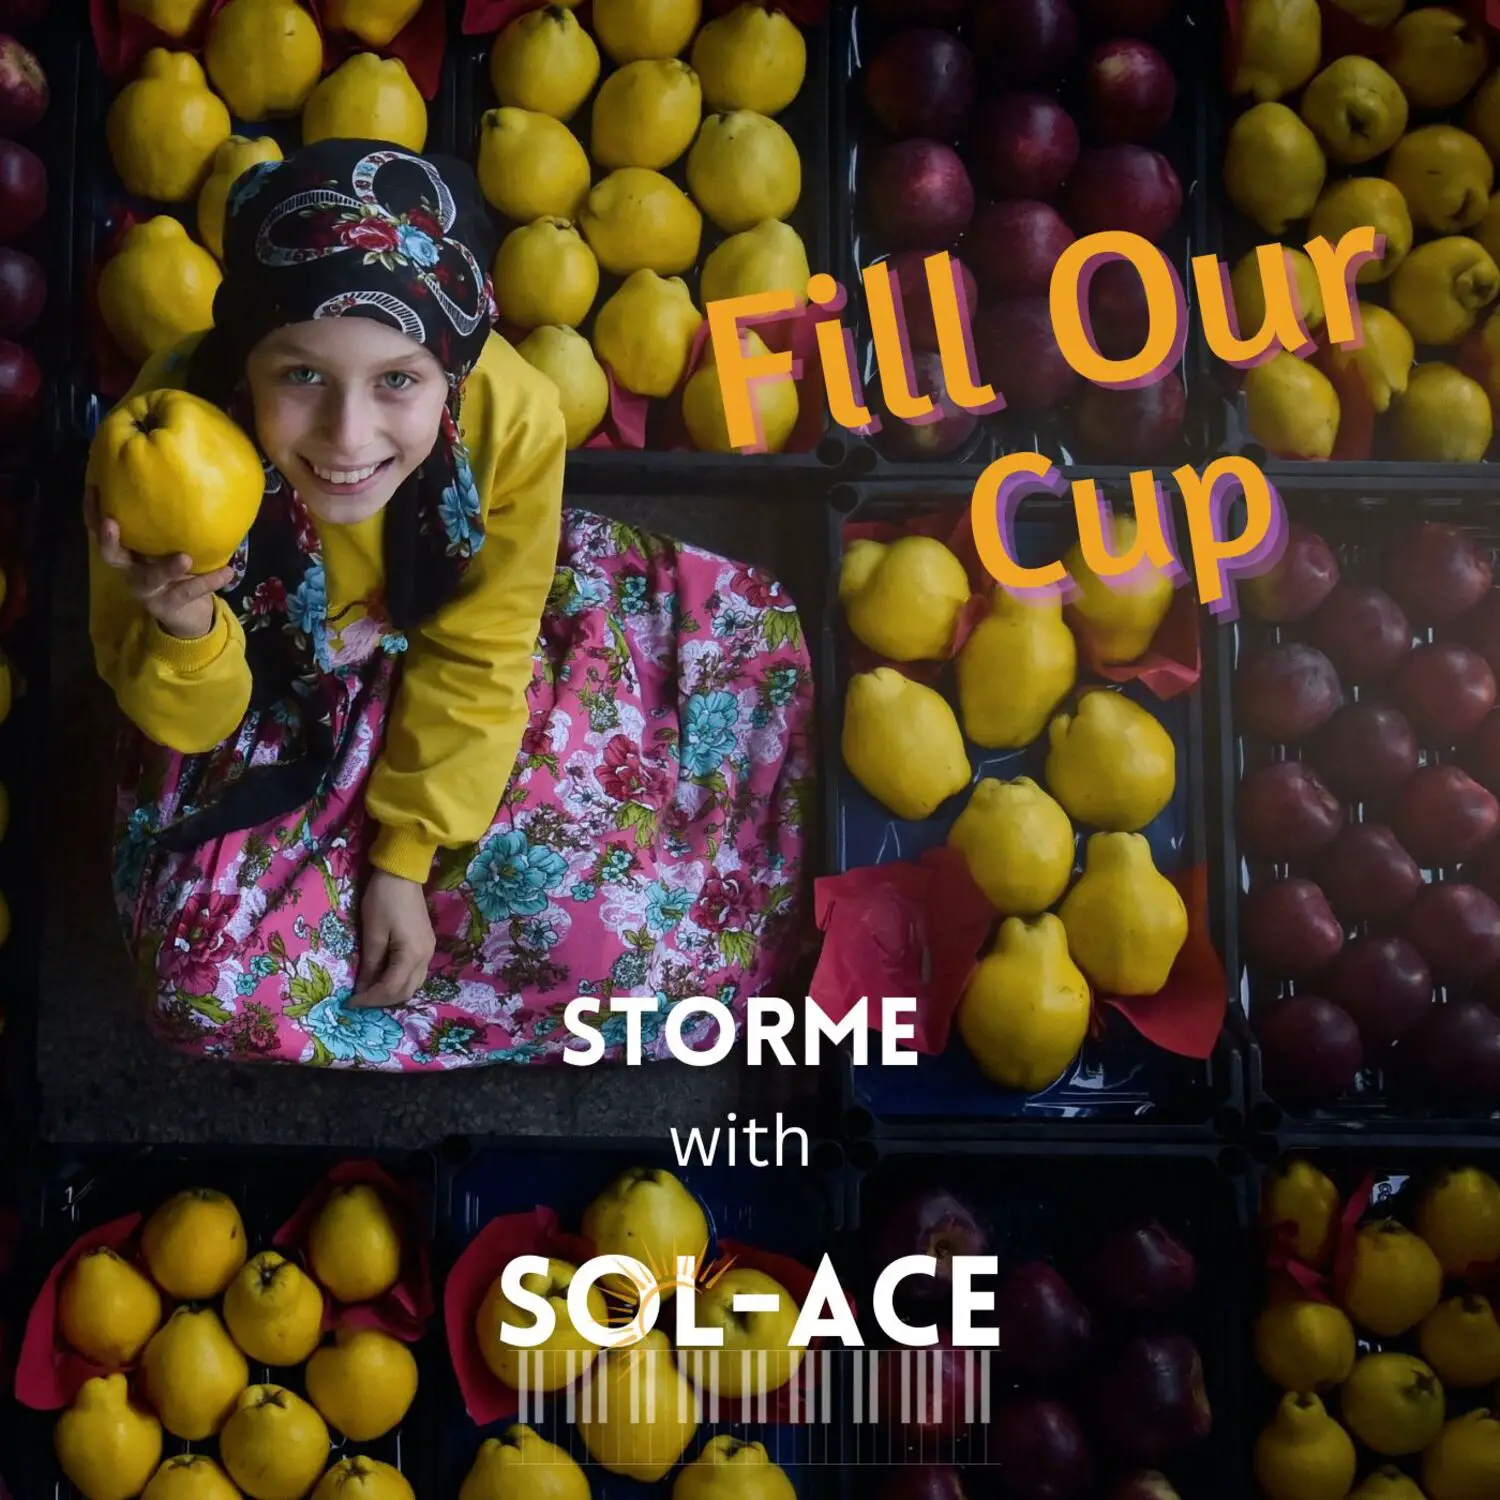 Fill our Cup by Storme with SOL-ACE